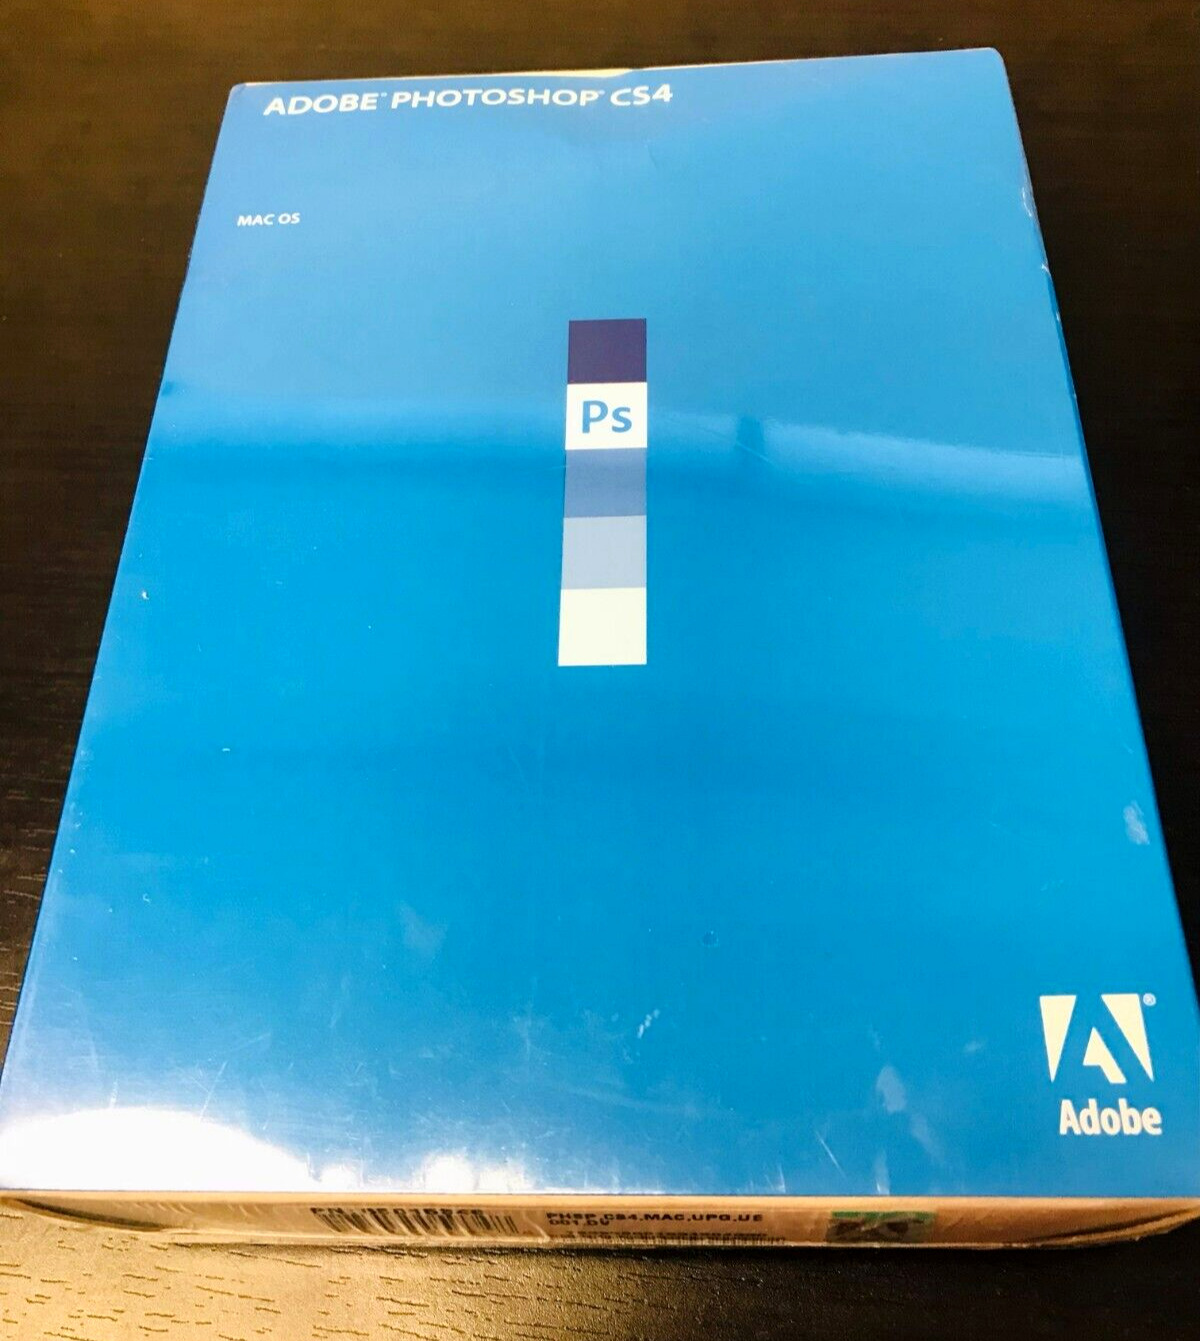 NEW Adobe Photoshop CS4 MAC OS, Upgrade Package Serial On Box - 65015348